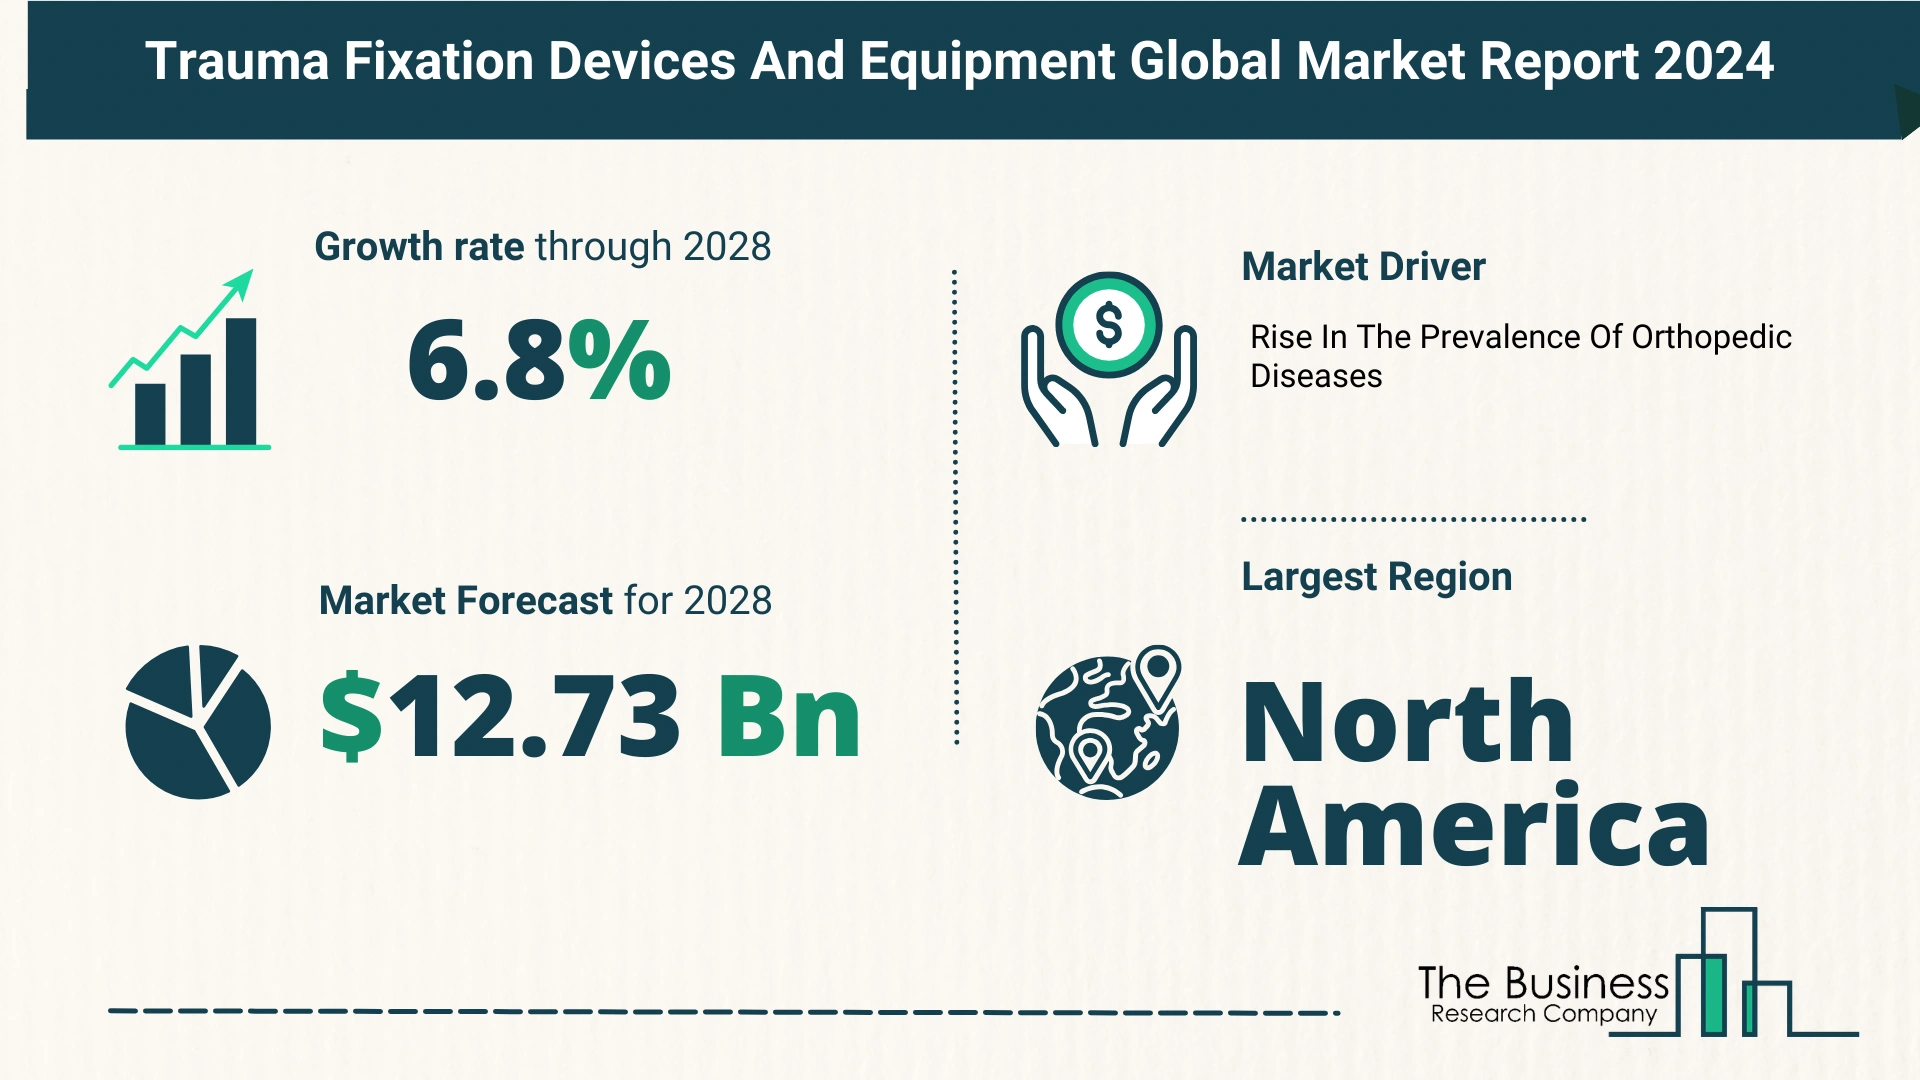 Key Takeaways From The Global Trauma Fixation Devices And Equipment Market Forecast 2024